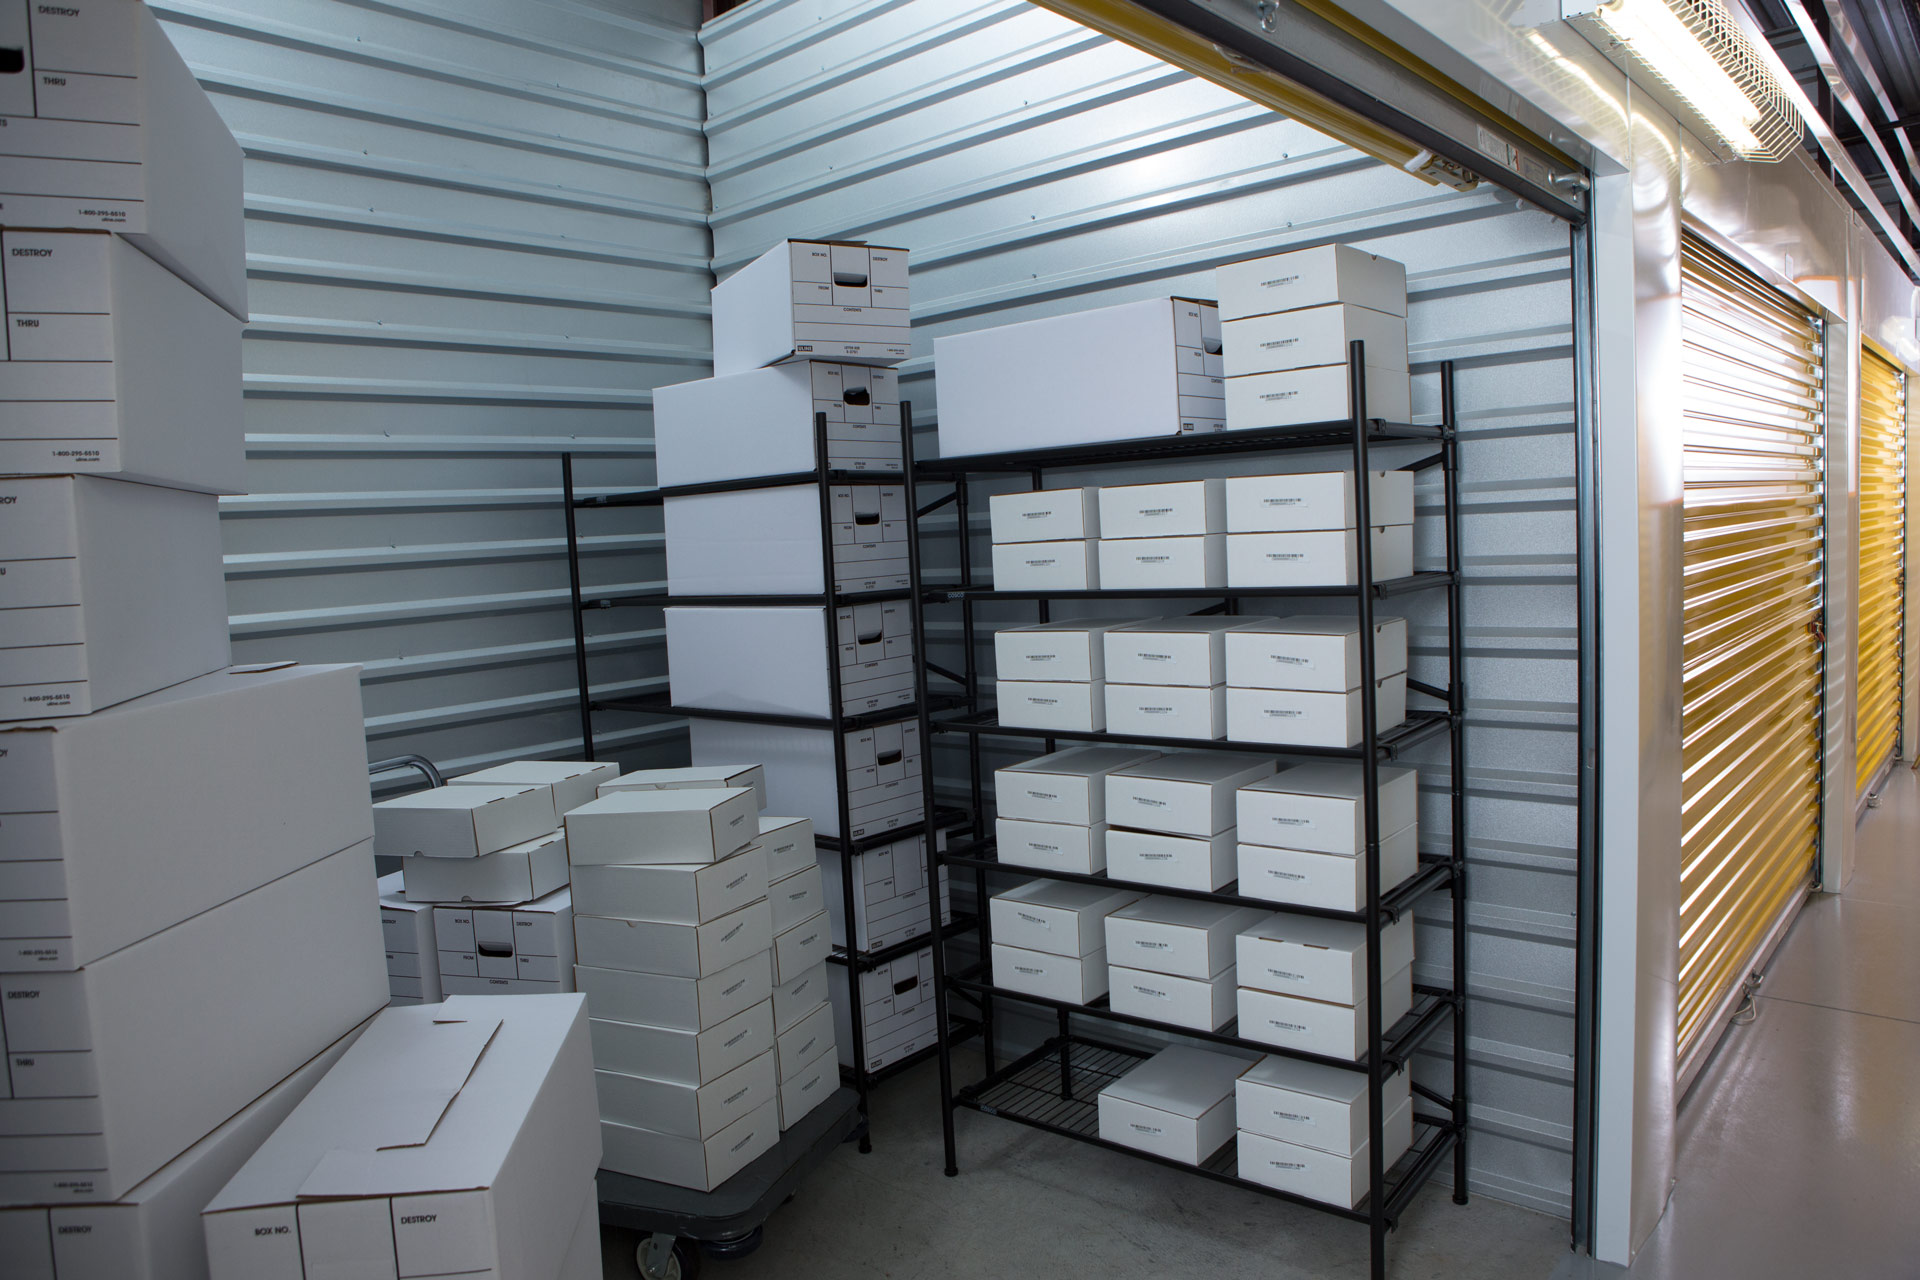 Four Creative Ways Self-Storage Units Can Be Used For Business